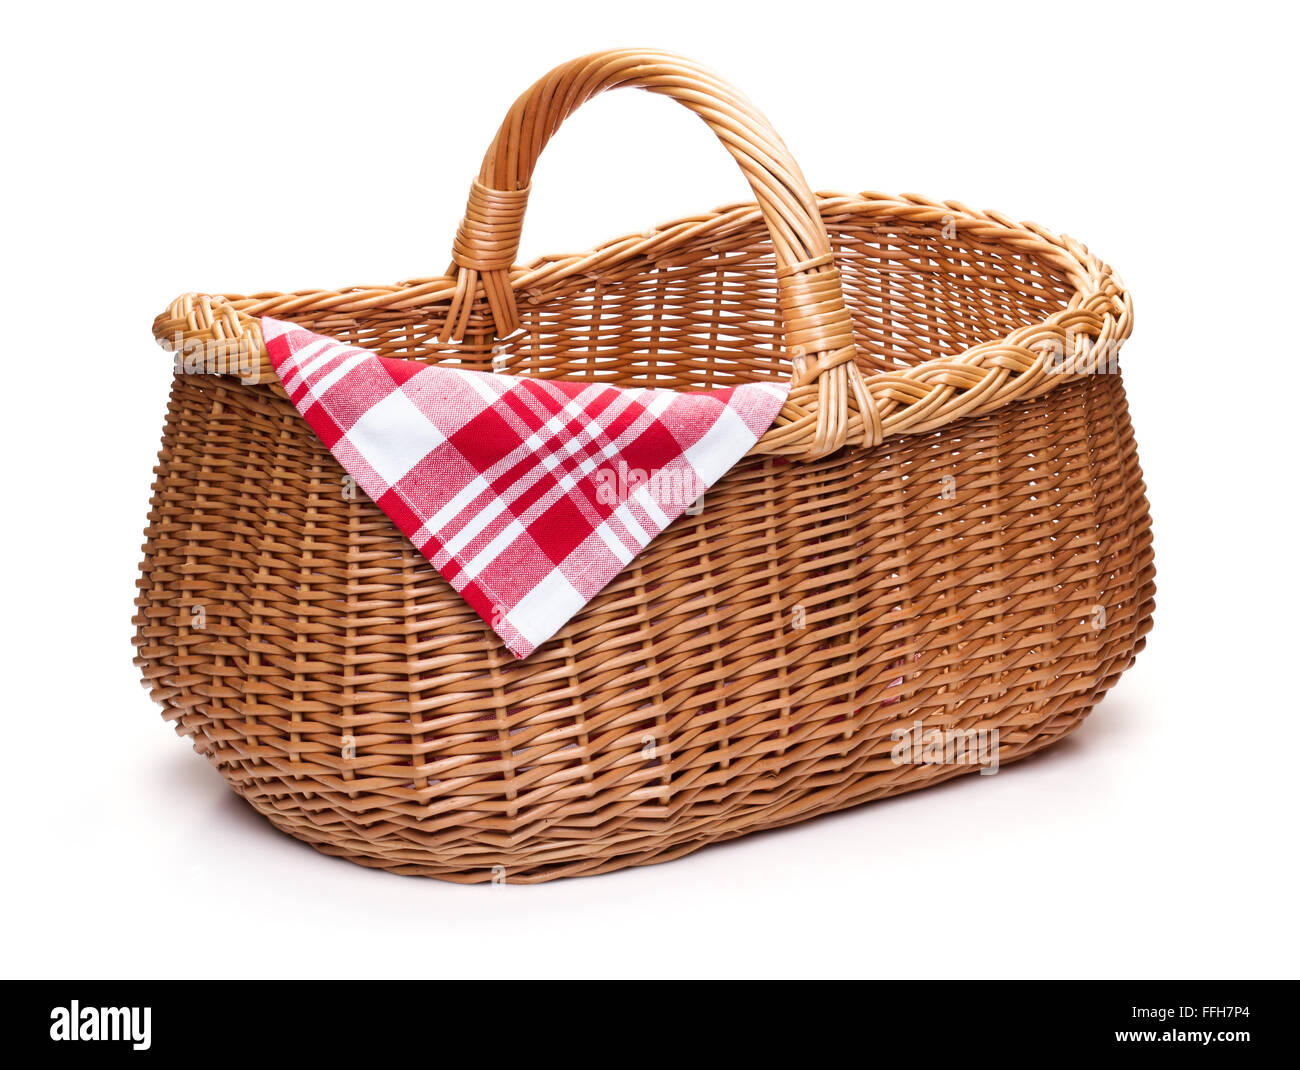 Wicker picnic basket with red checked napkin, isolated on the white background. Stock Photo